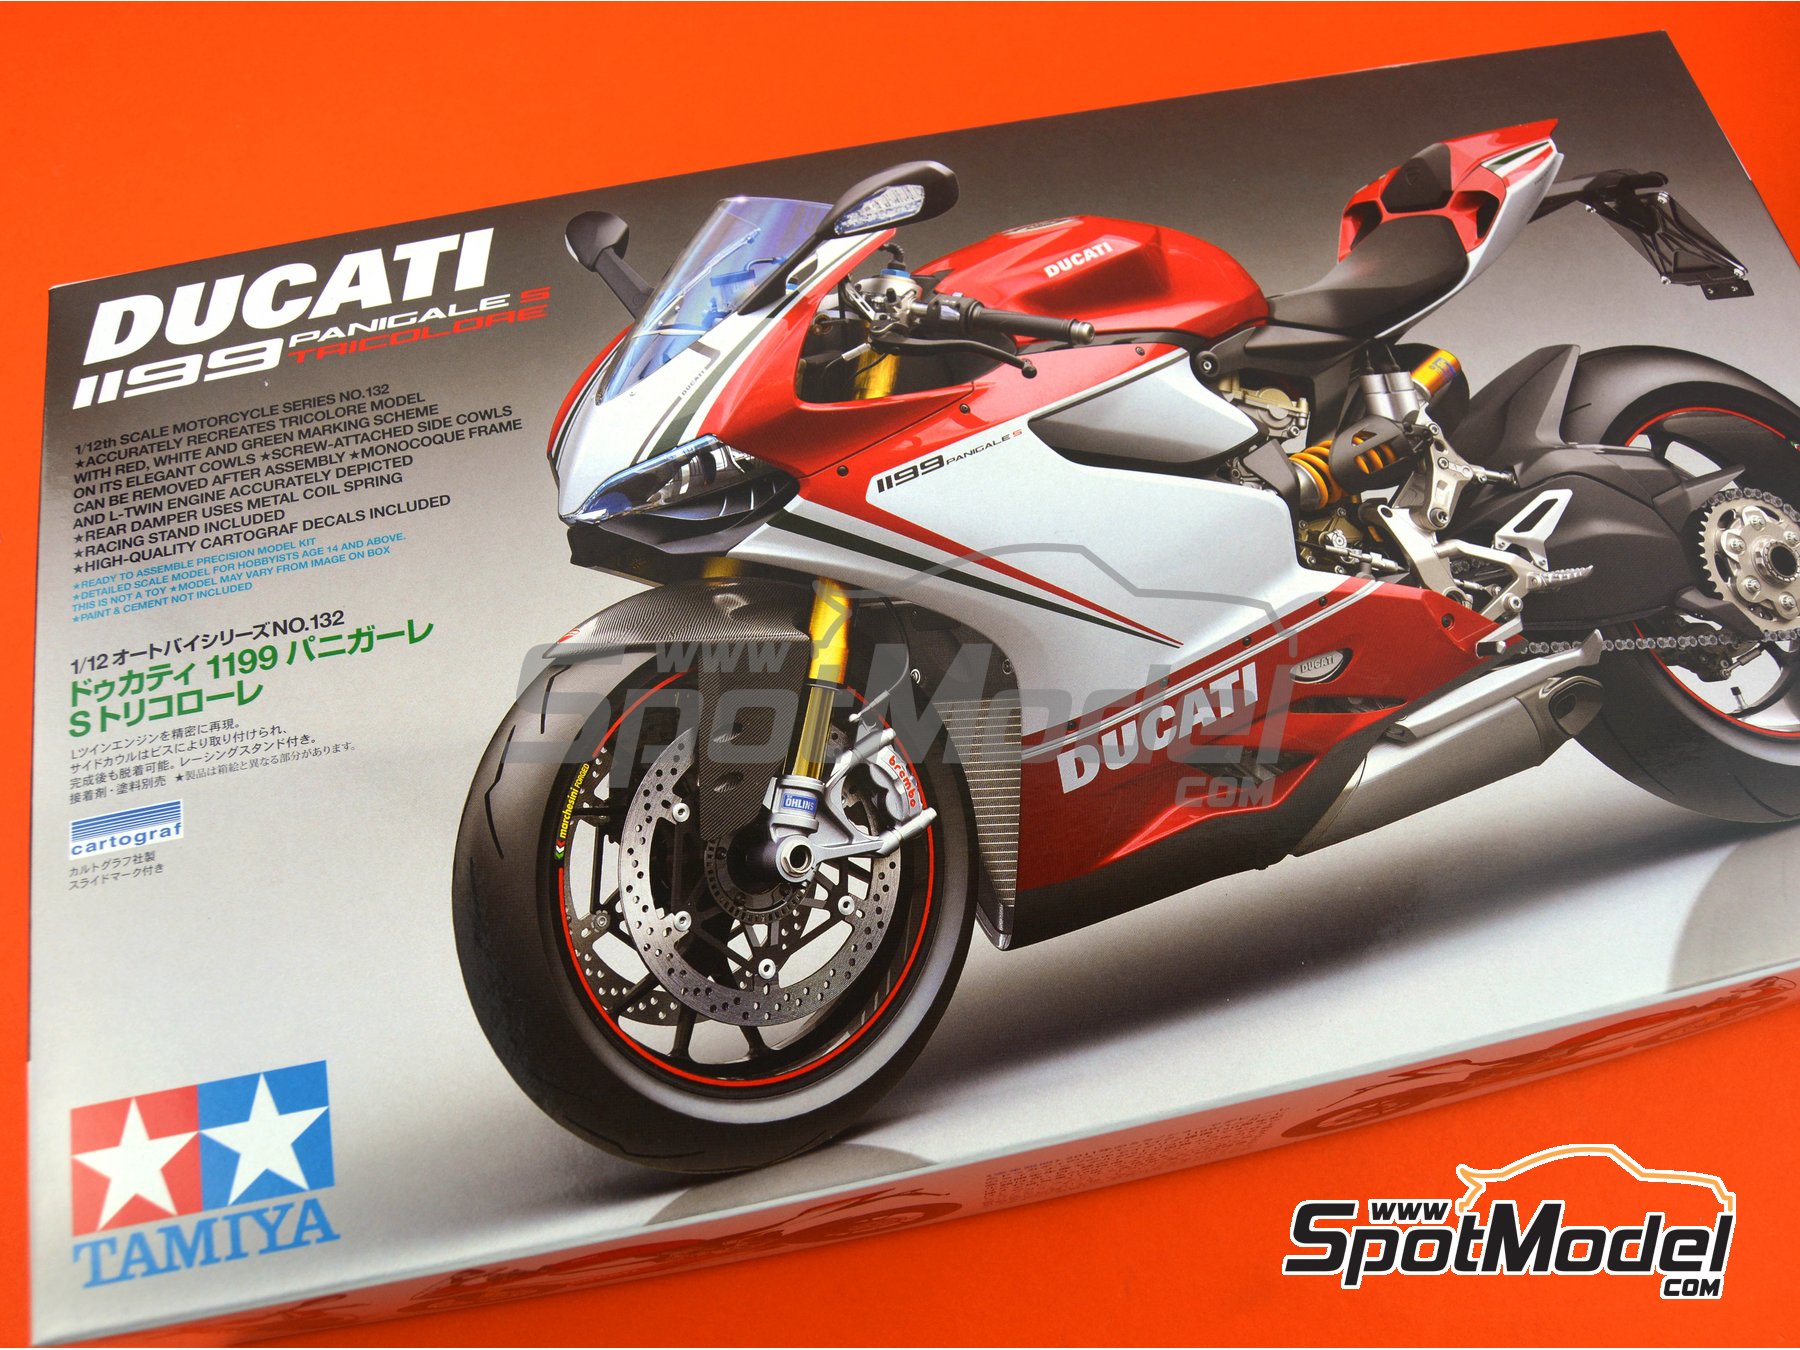 Tamiya 1/12 Ducati 1199 Panigale S Tricolore Motorcycle Tam14132 for sale online 